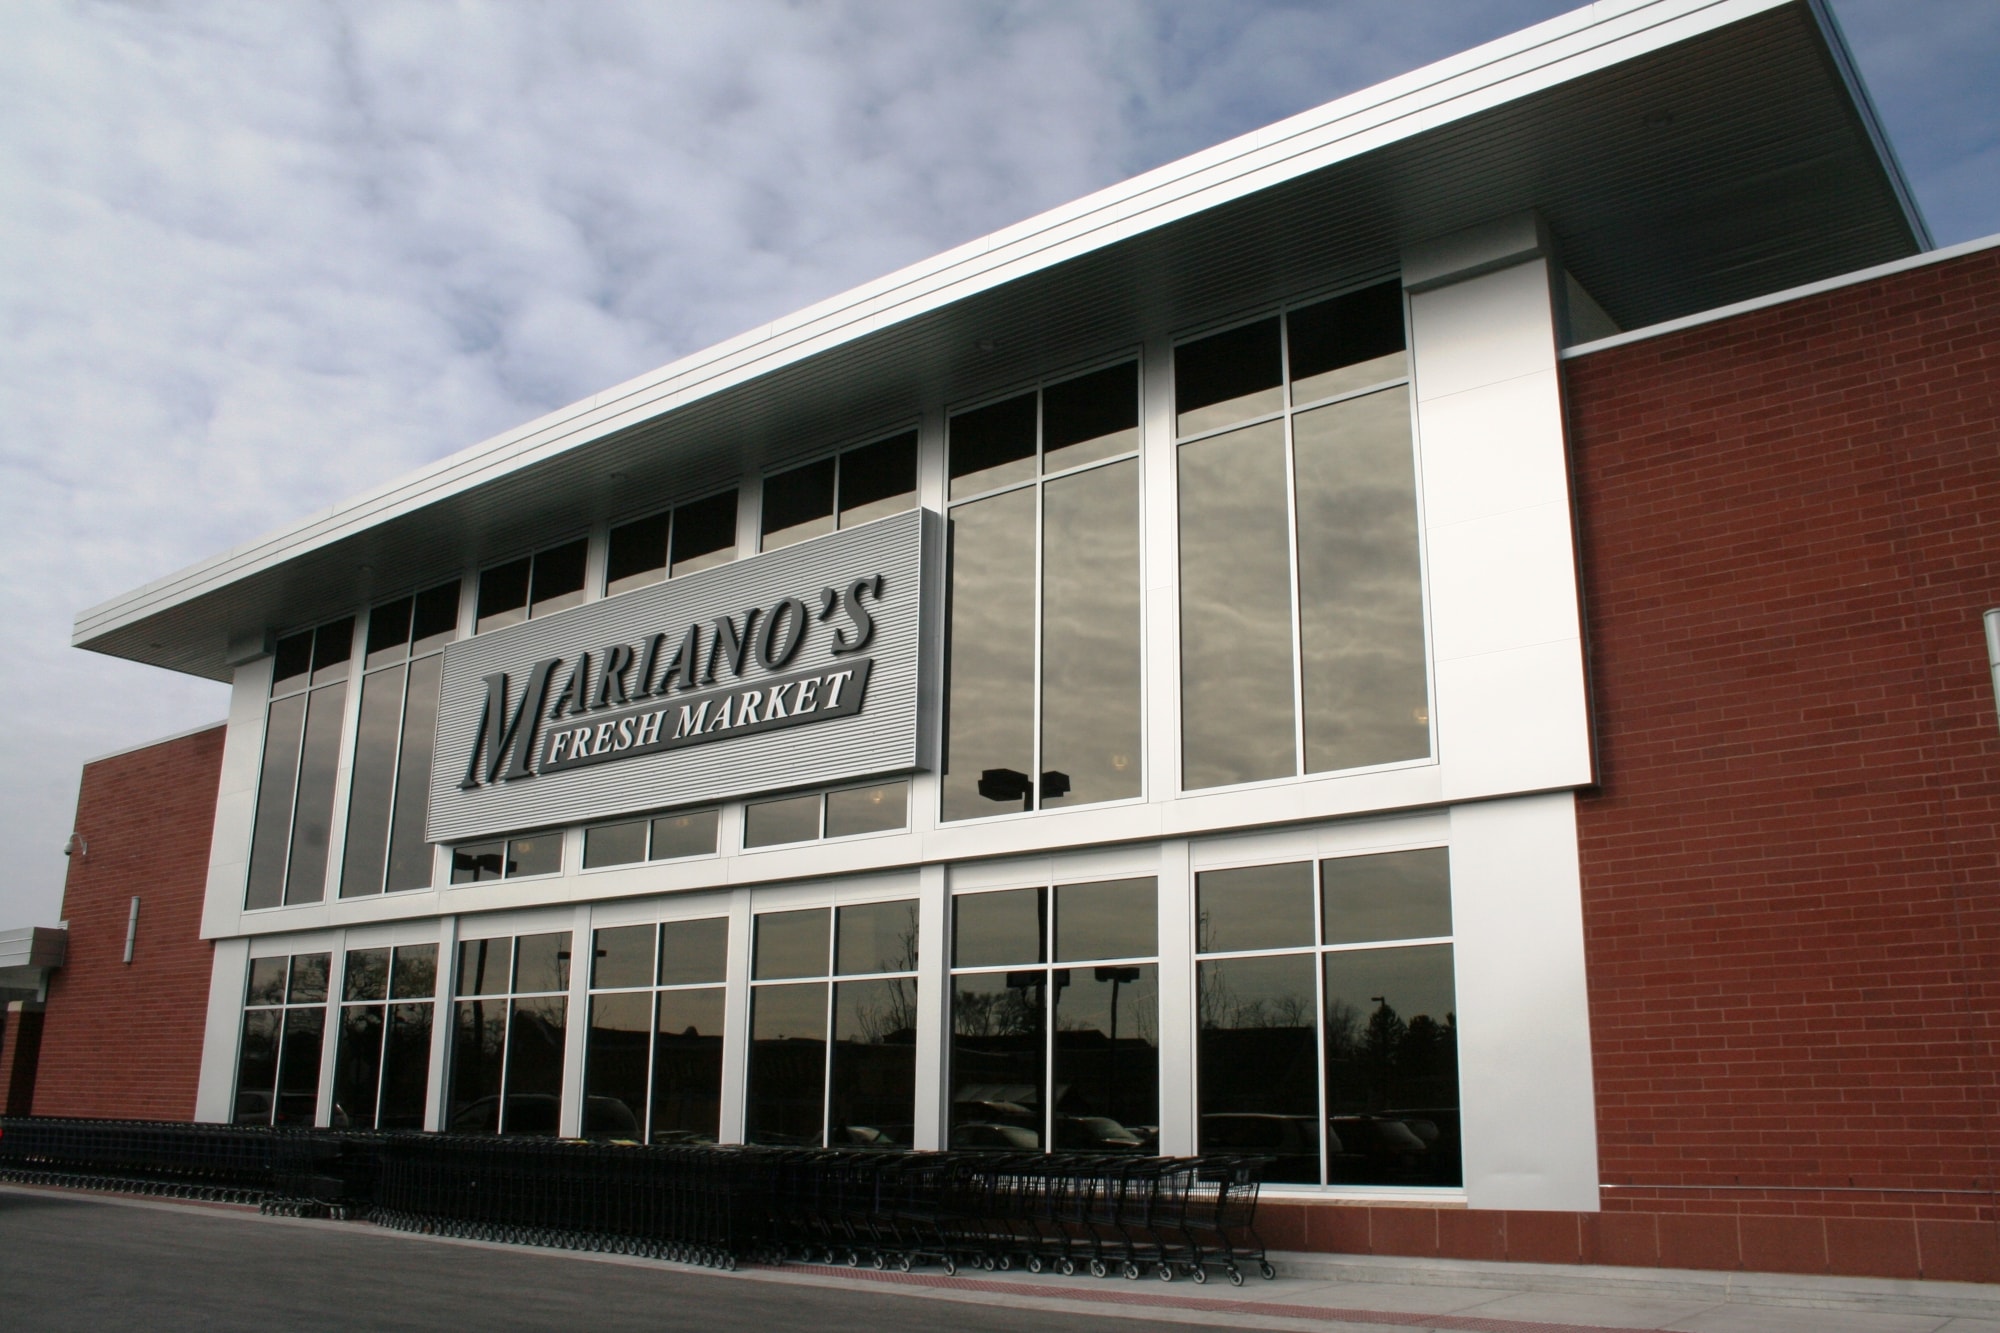 Inland Private Completes Final Mariano’s Fresh Market Sale with 9.5% Annualized Return